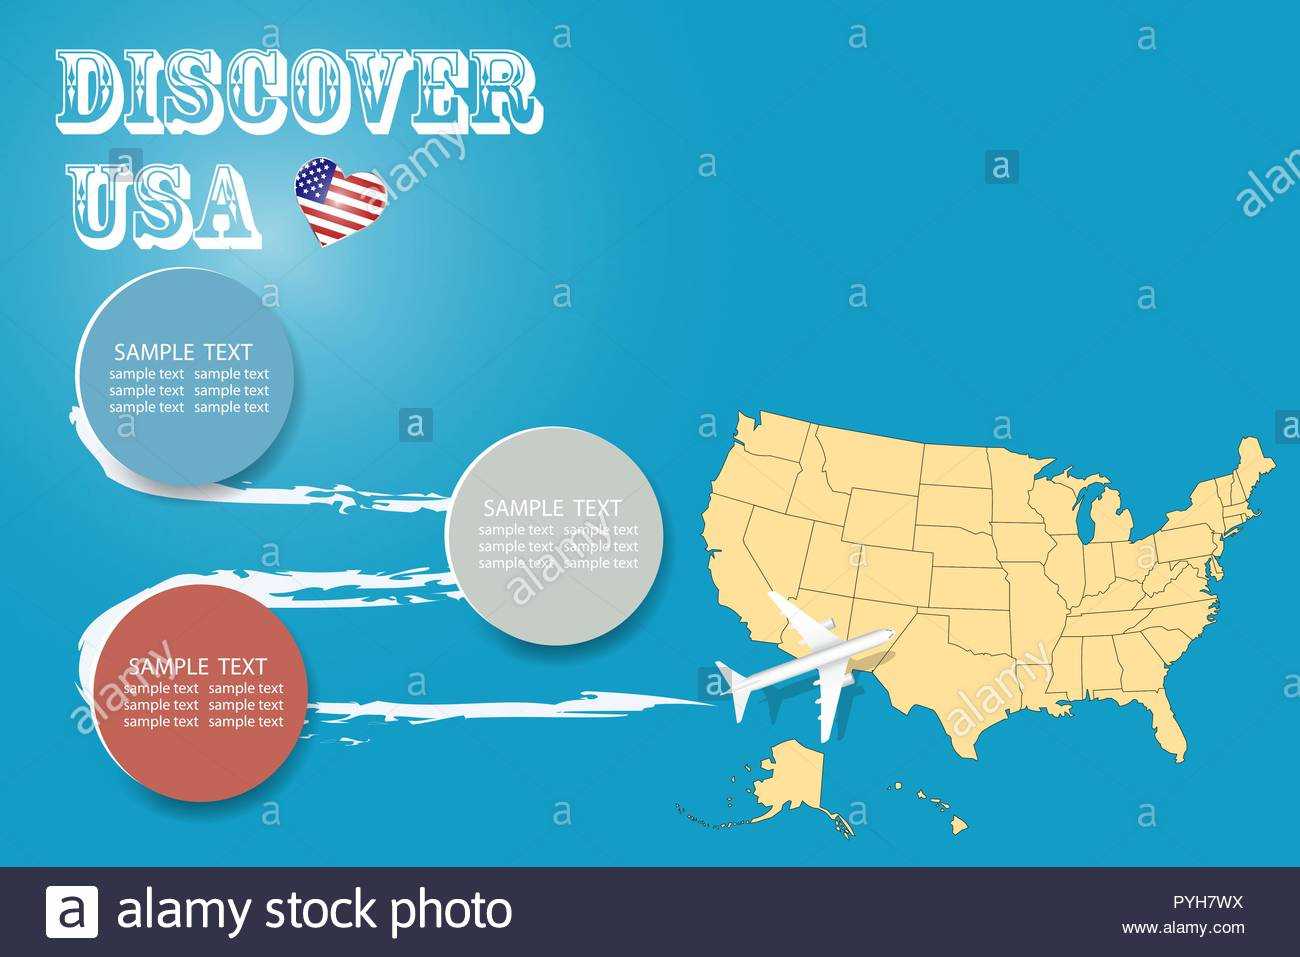 Discover Usa Blank Template With An Airplane Flying To The For Blank Template Of The United States